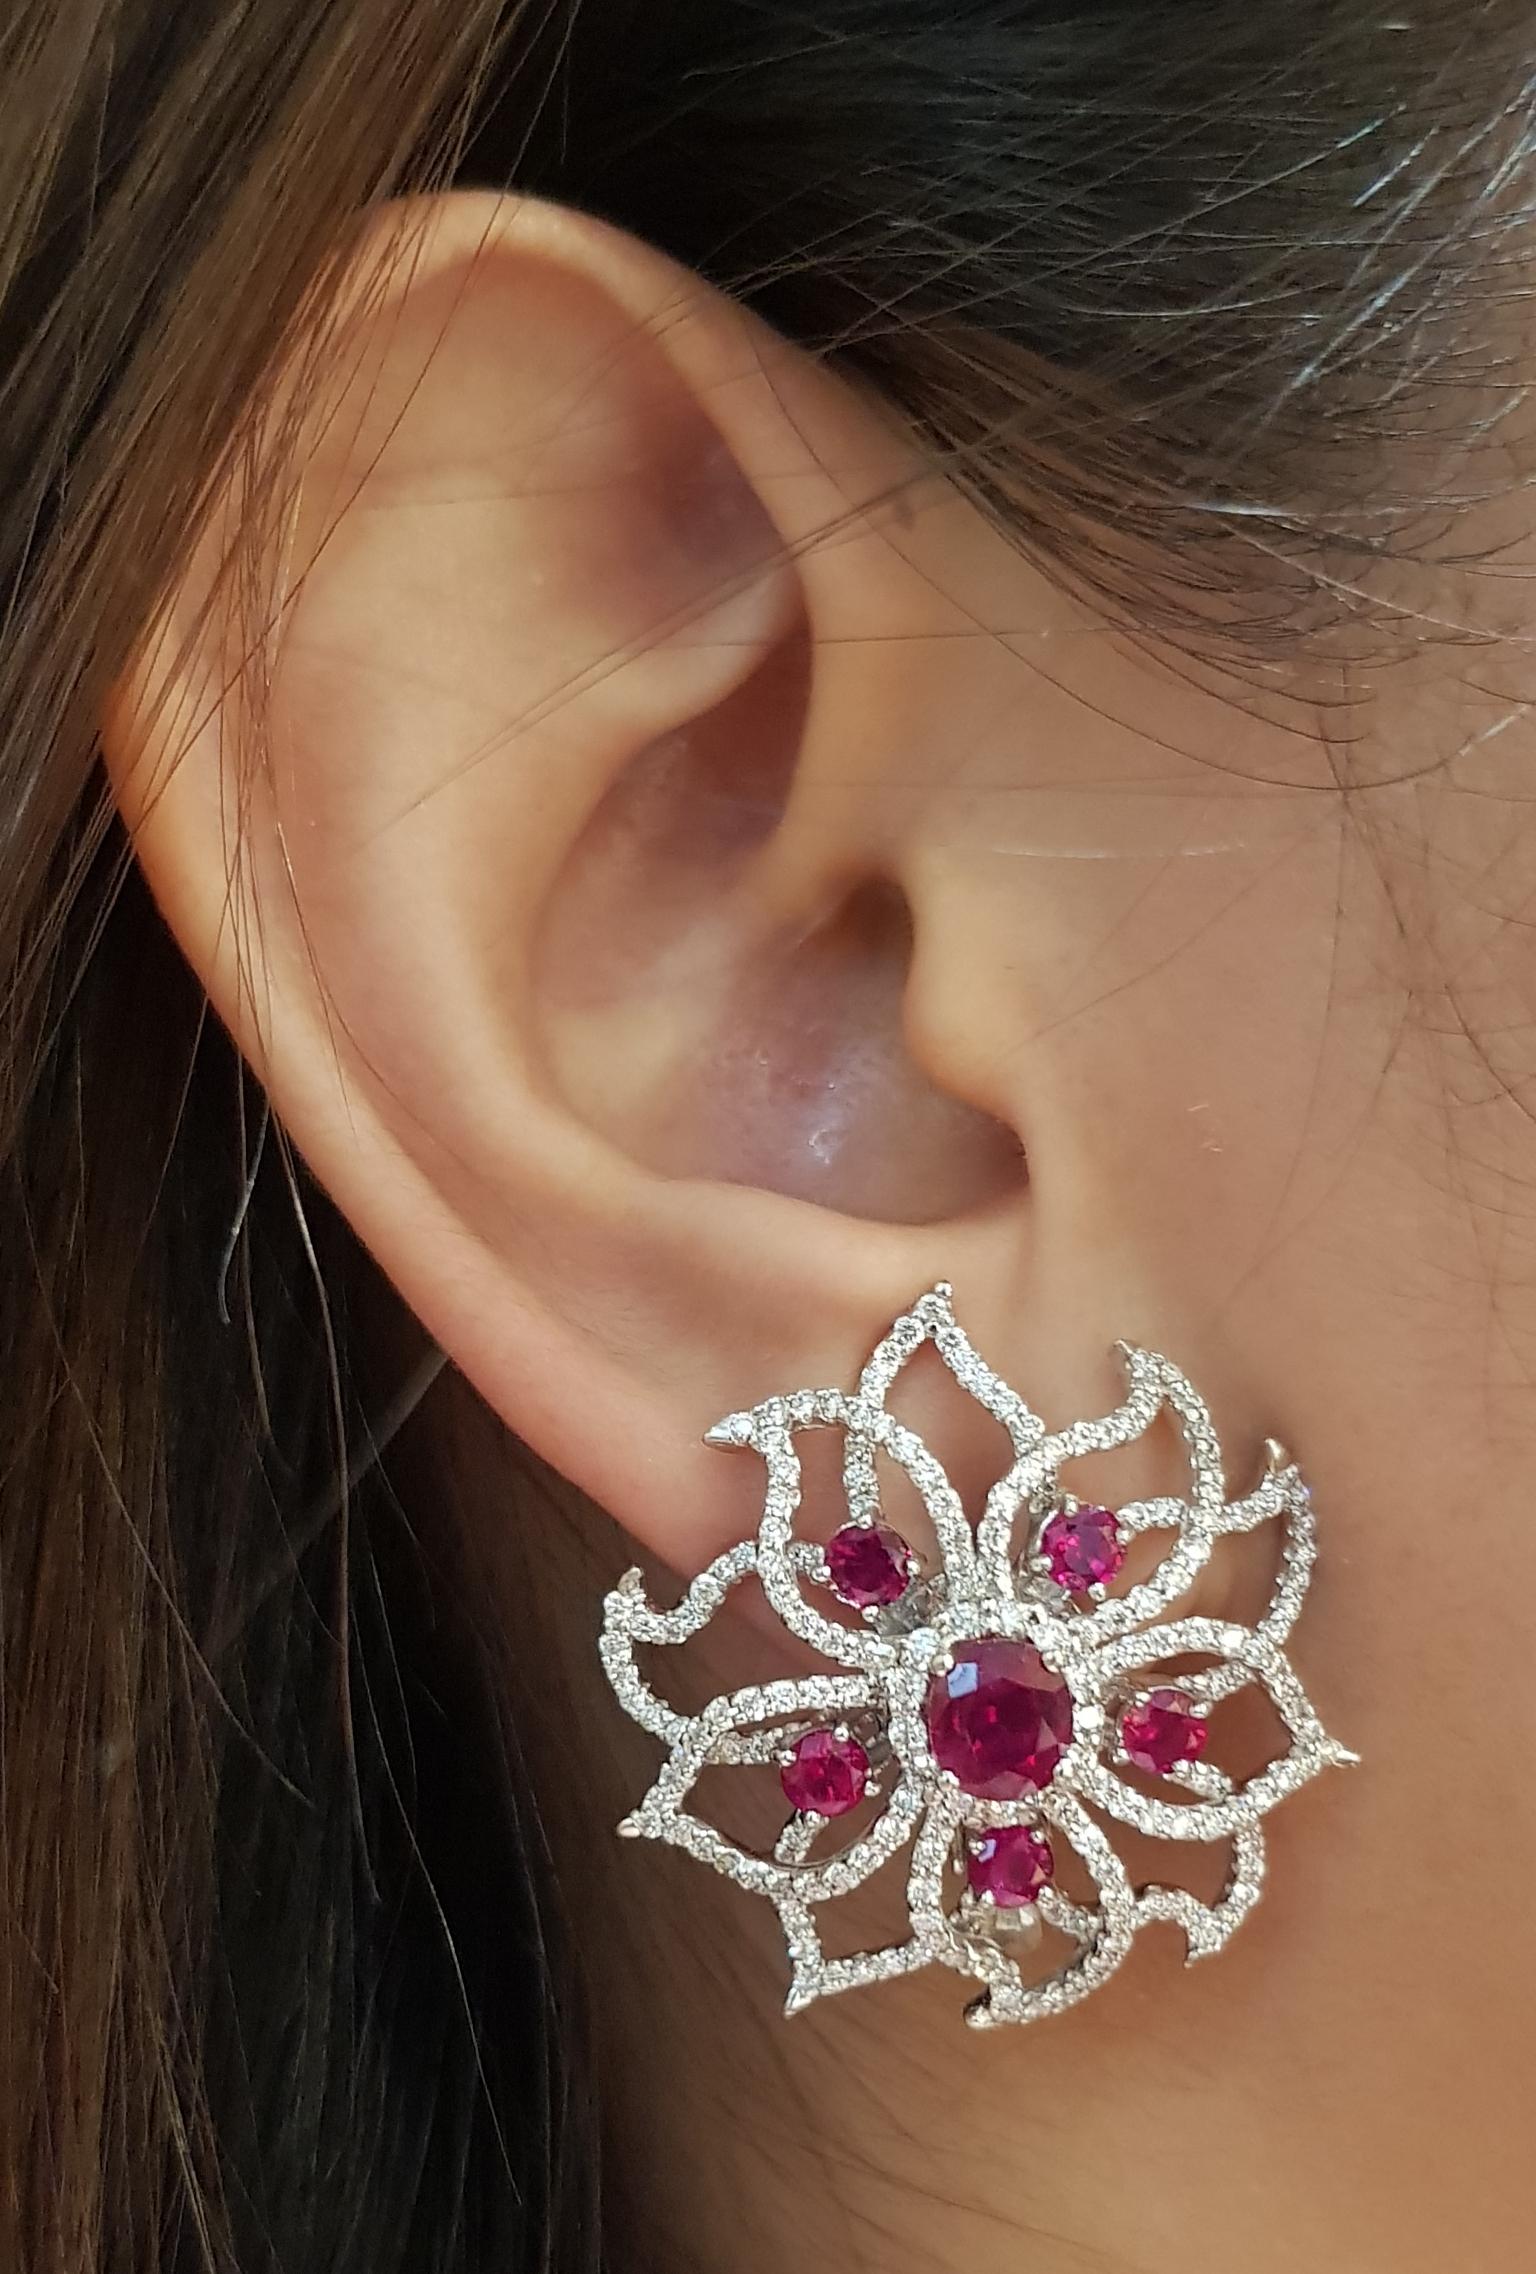 Ruby 2.40 carats with Diamond 2.75 carats and Ruby 2.24 carats Earrings set in 18 Karat White Gold Settings

Width:  3.2 cm 
Length:  2.9 cm
Total Weight: 22.03 grams

